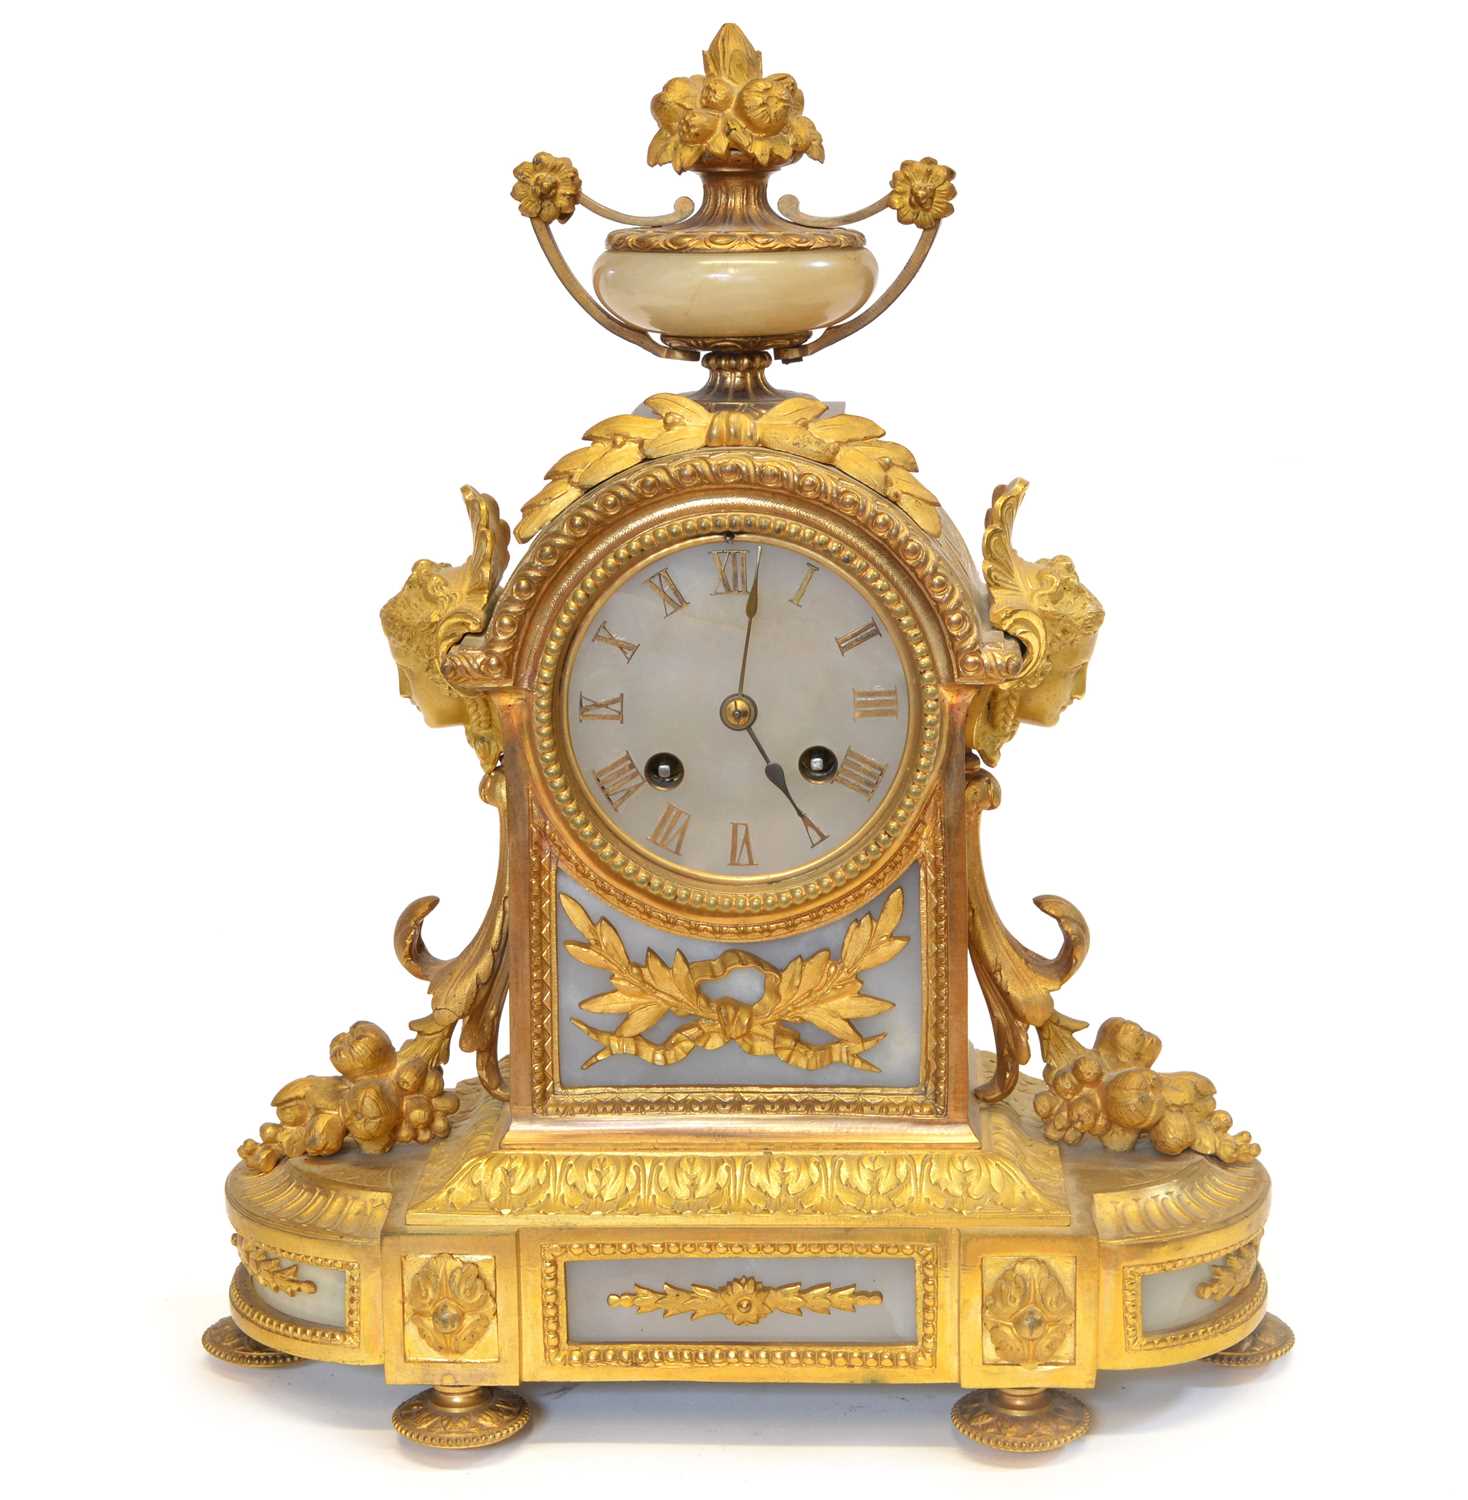 Lot 185 - Late 19th Century french marble and ormolu mounted mantel clock